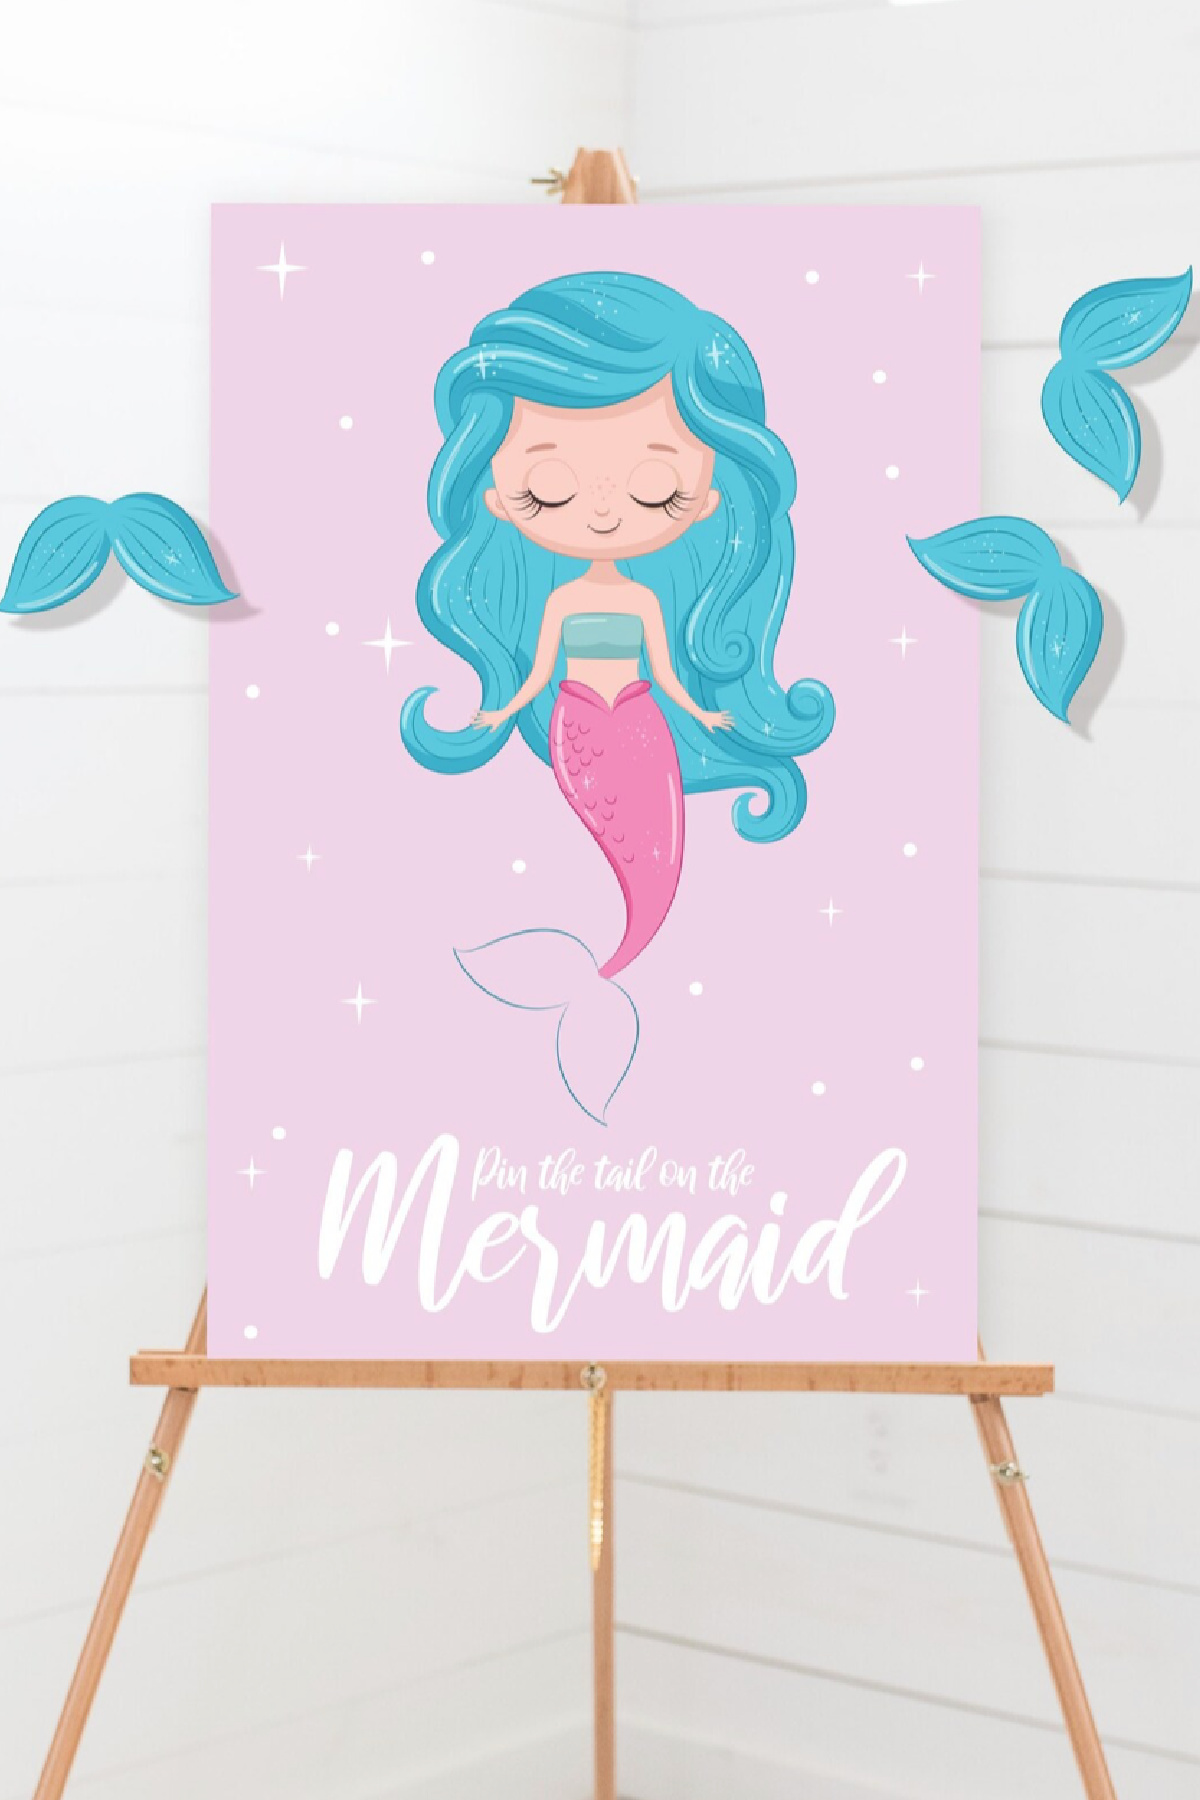 Pin The Tail on the Mermaid 